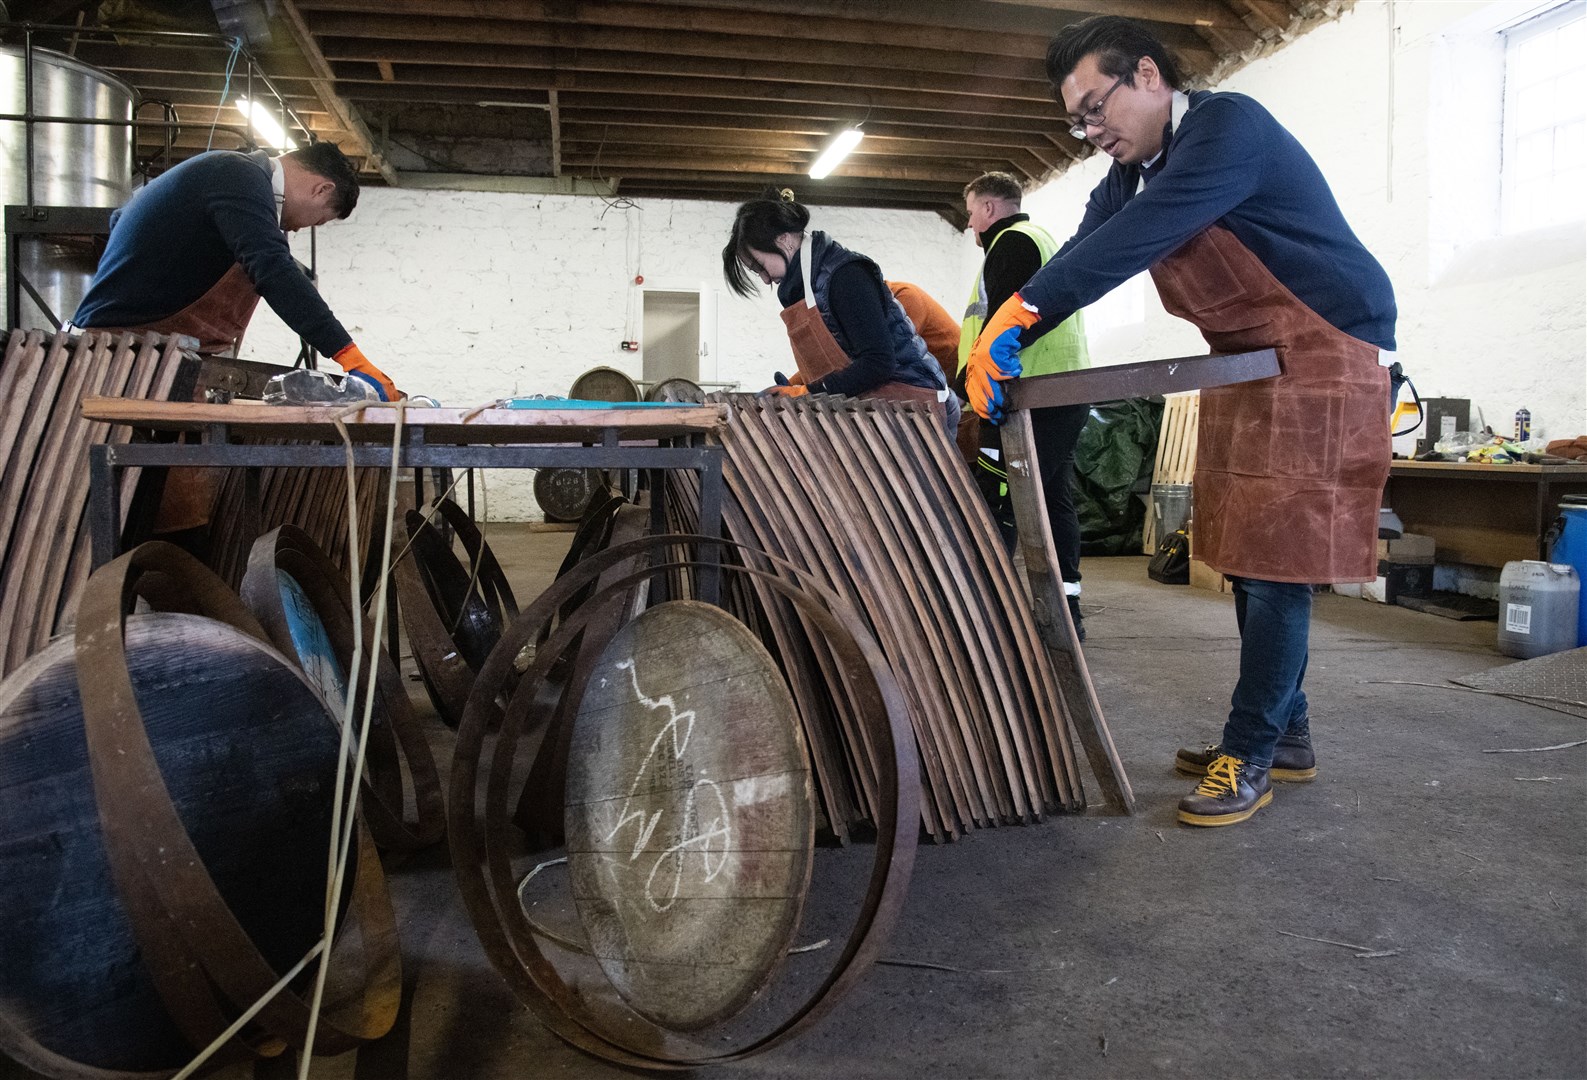 Roll out the barrel. The visitors enjoyed the cask-making session at Coleburn Distillery. Picture: Daniel Forsyth